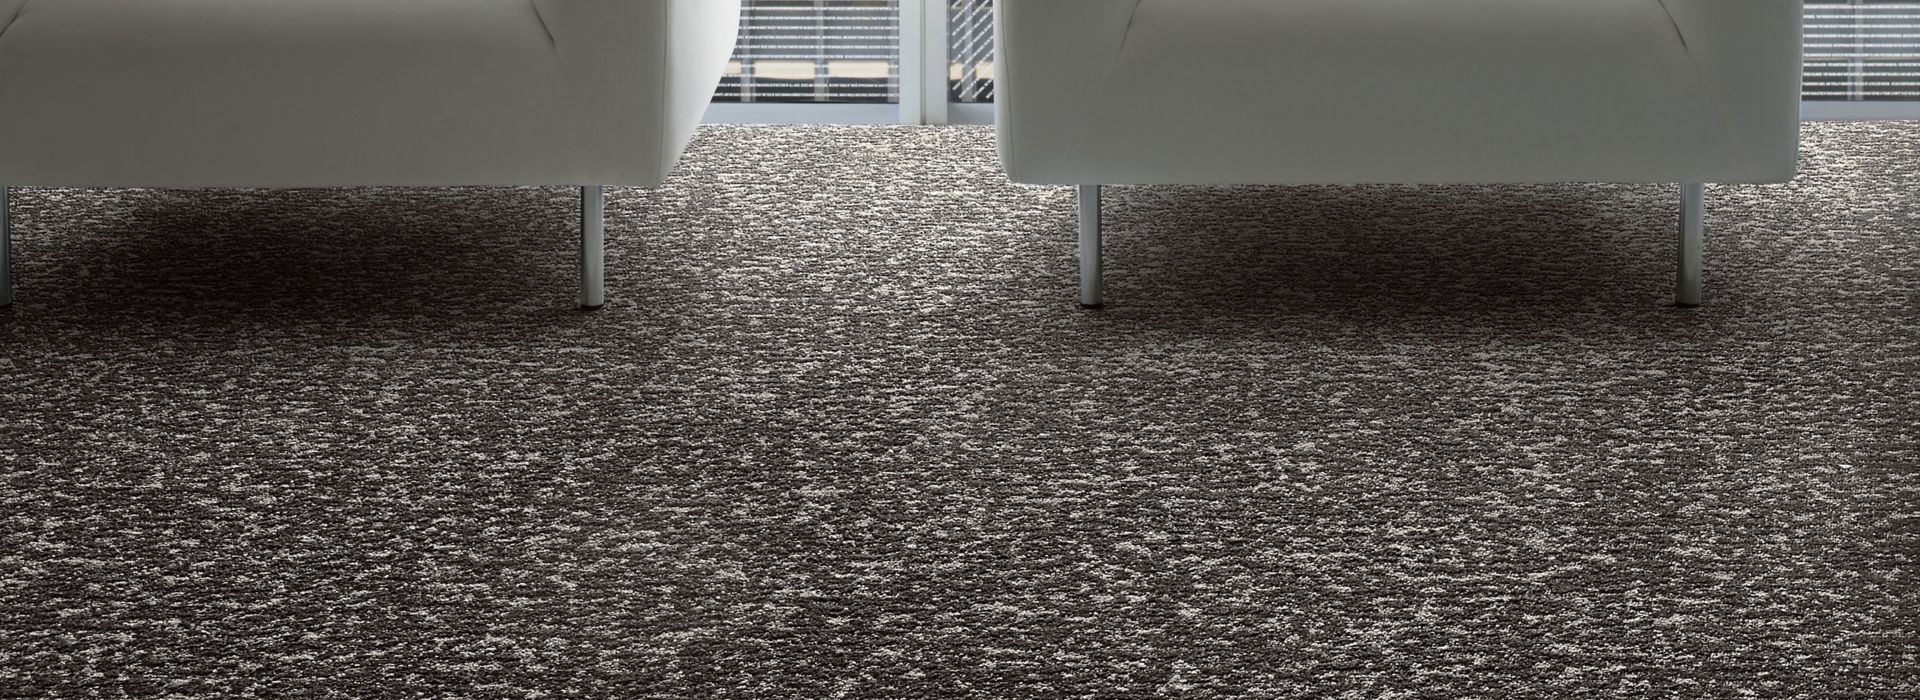 Interface Vessel square carpet tile with chairs in front of window